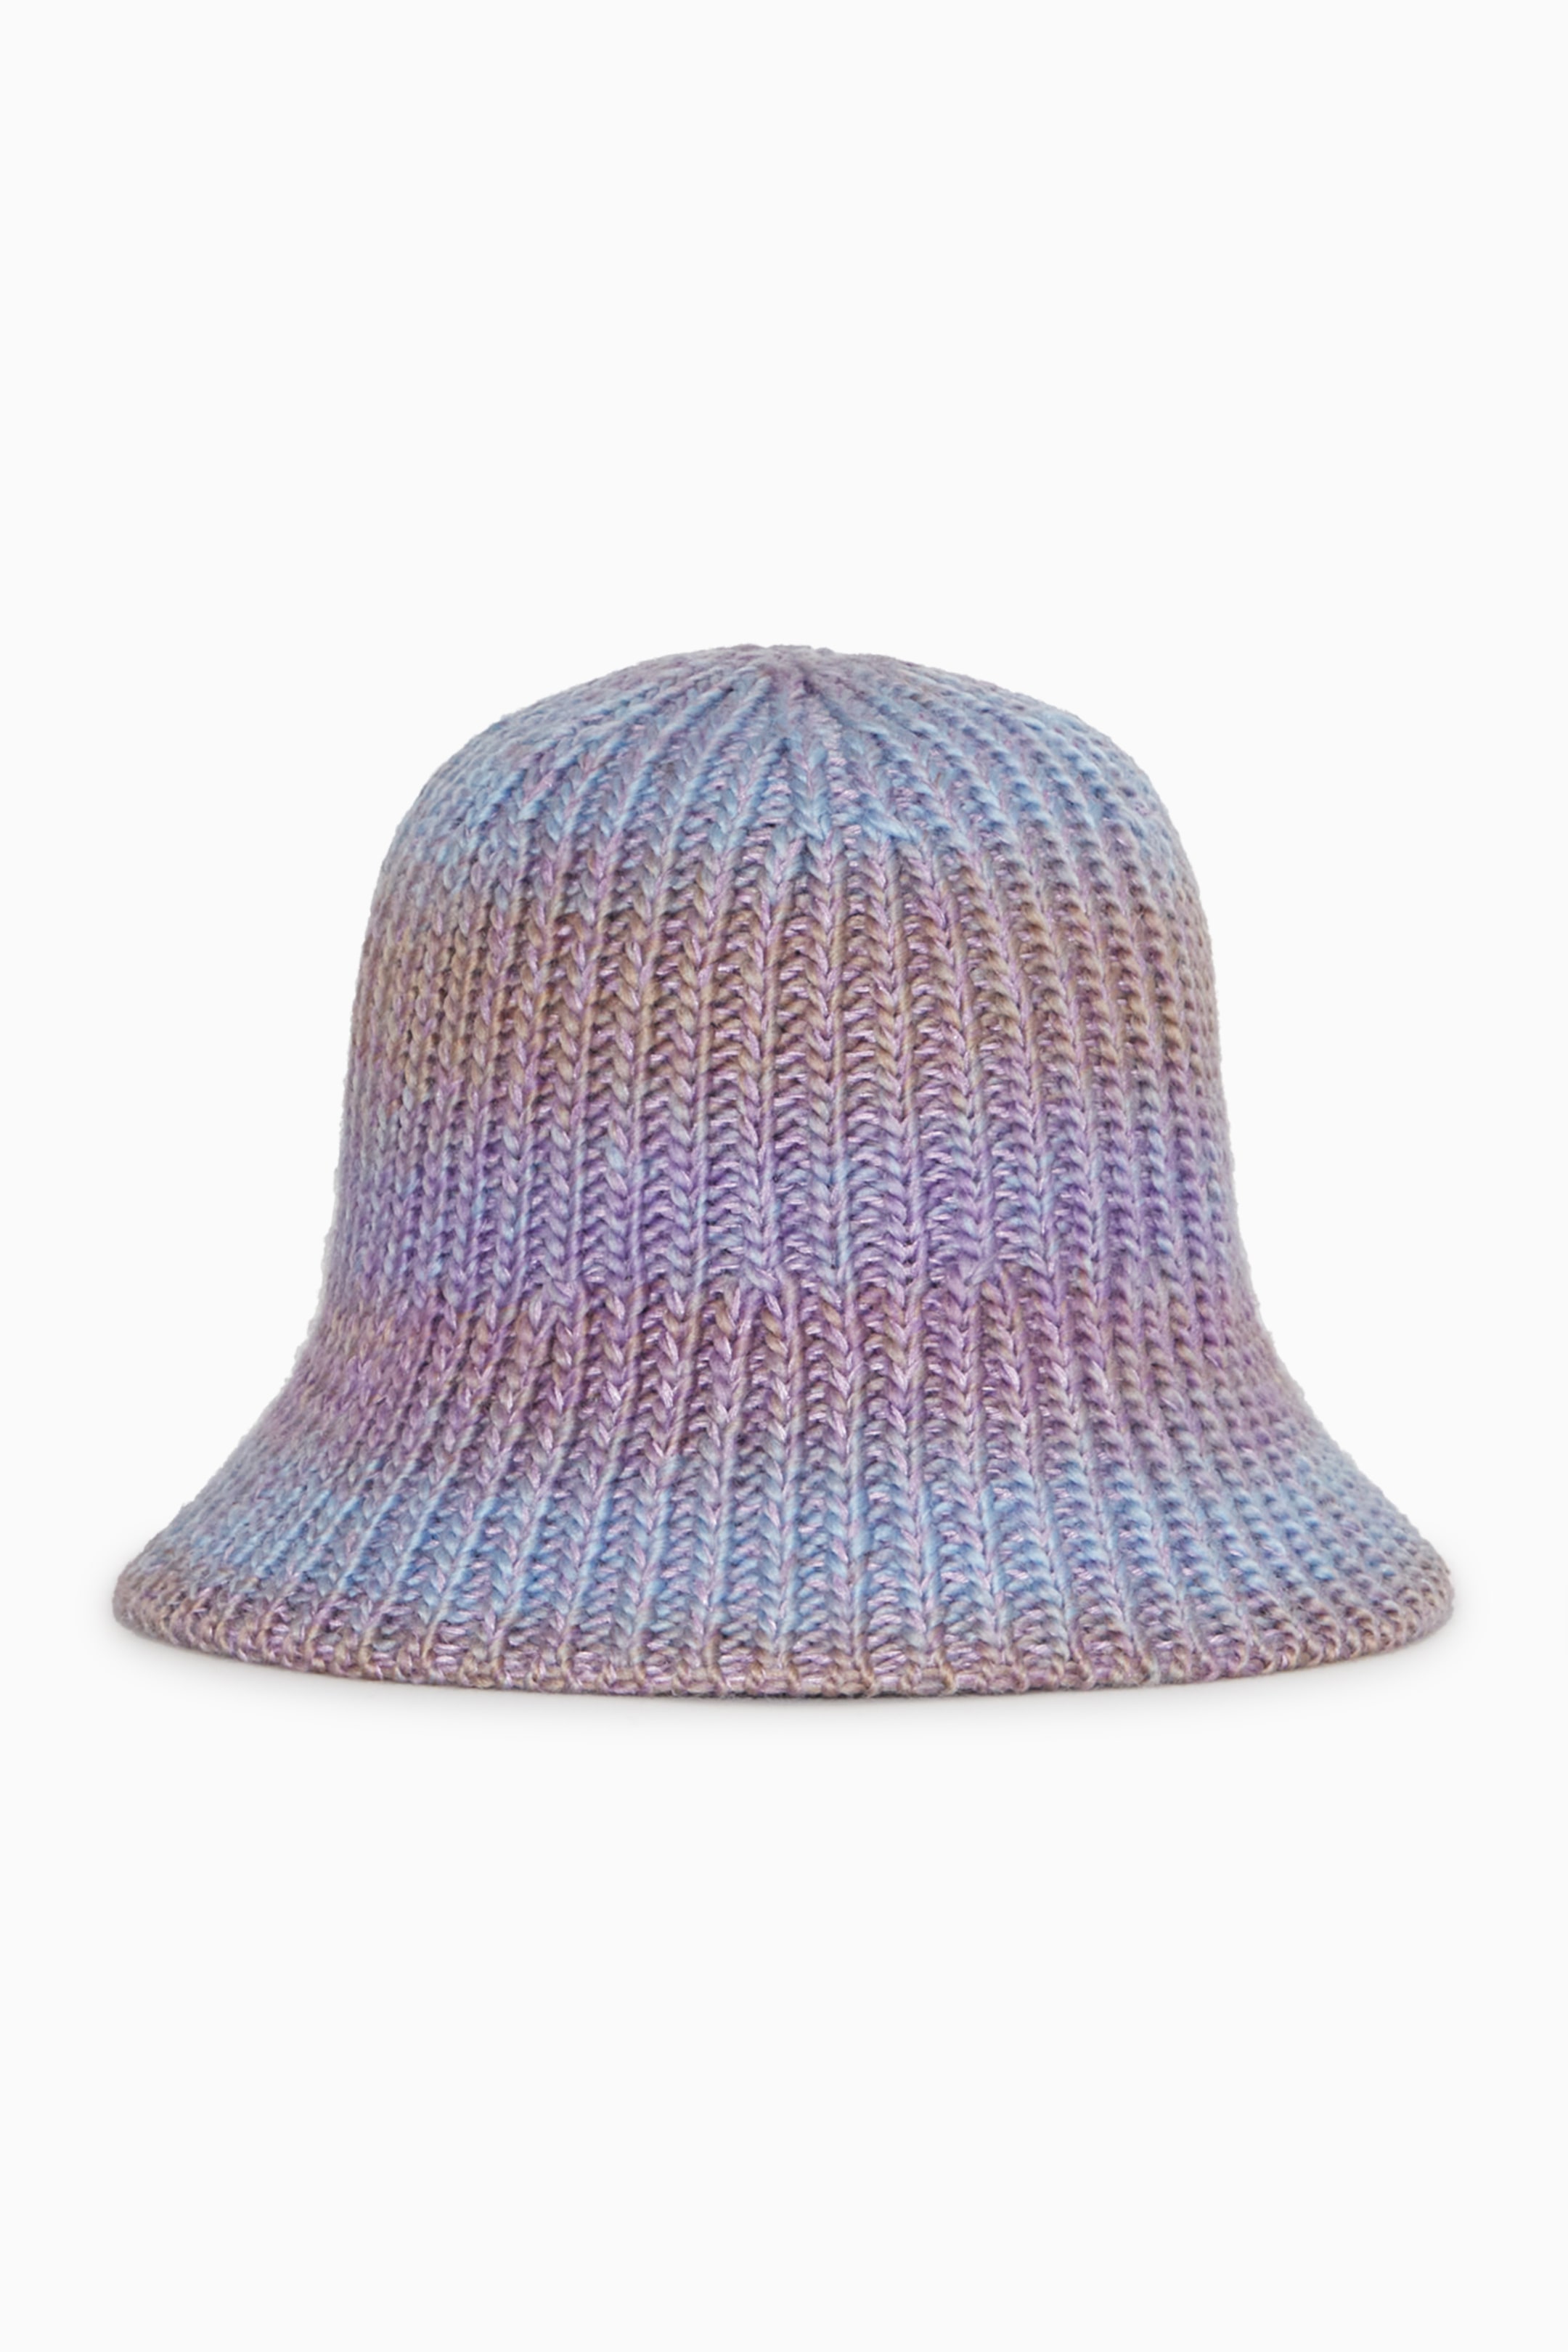 SPACE-DYED BUCKET HAT LILAC / PRINTED DAME H&M DK